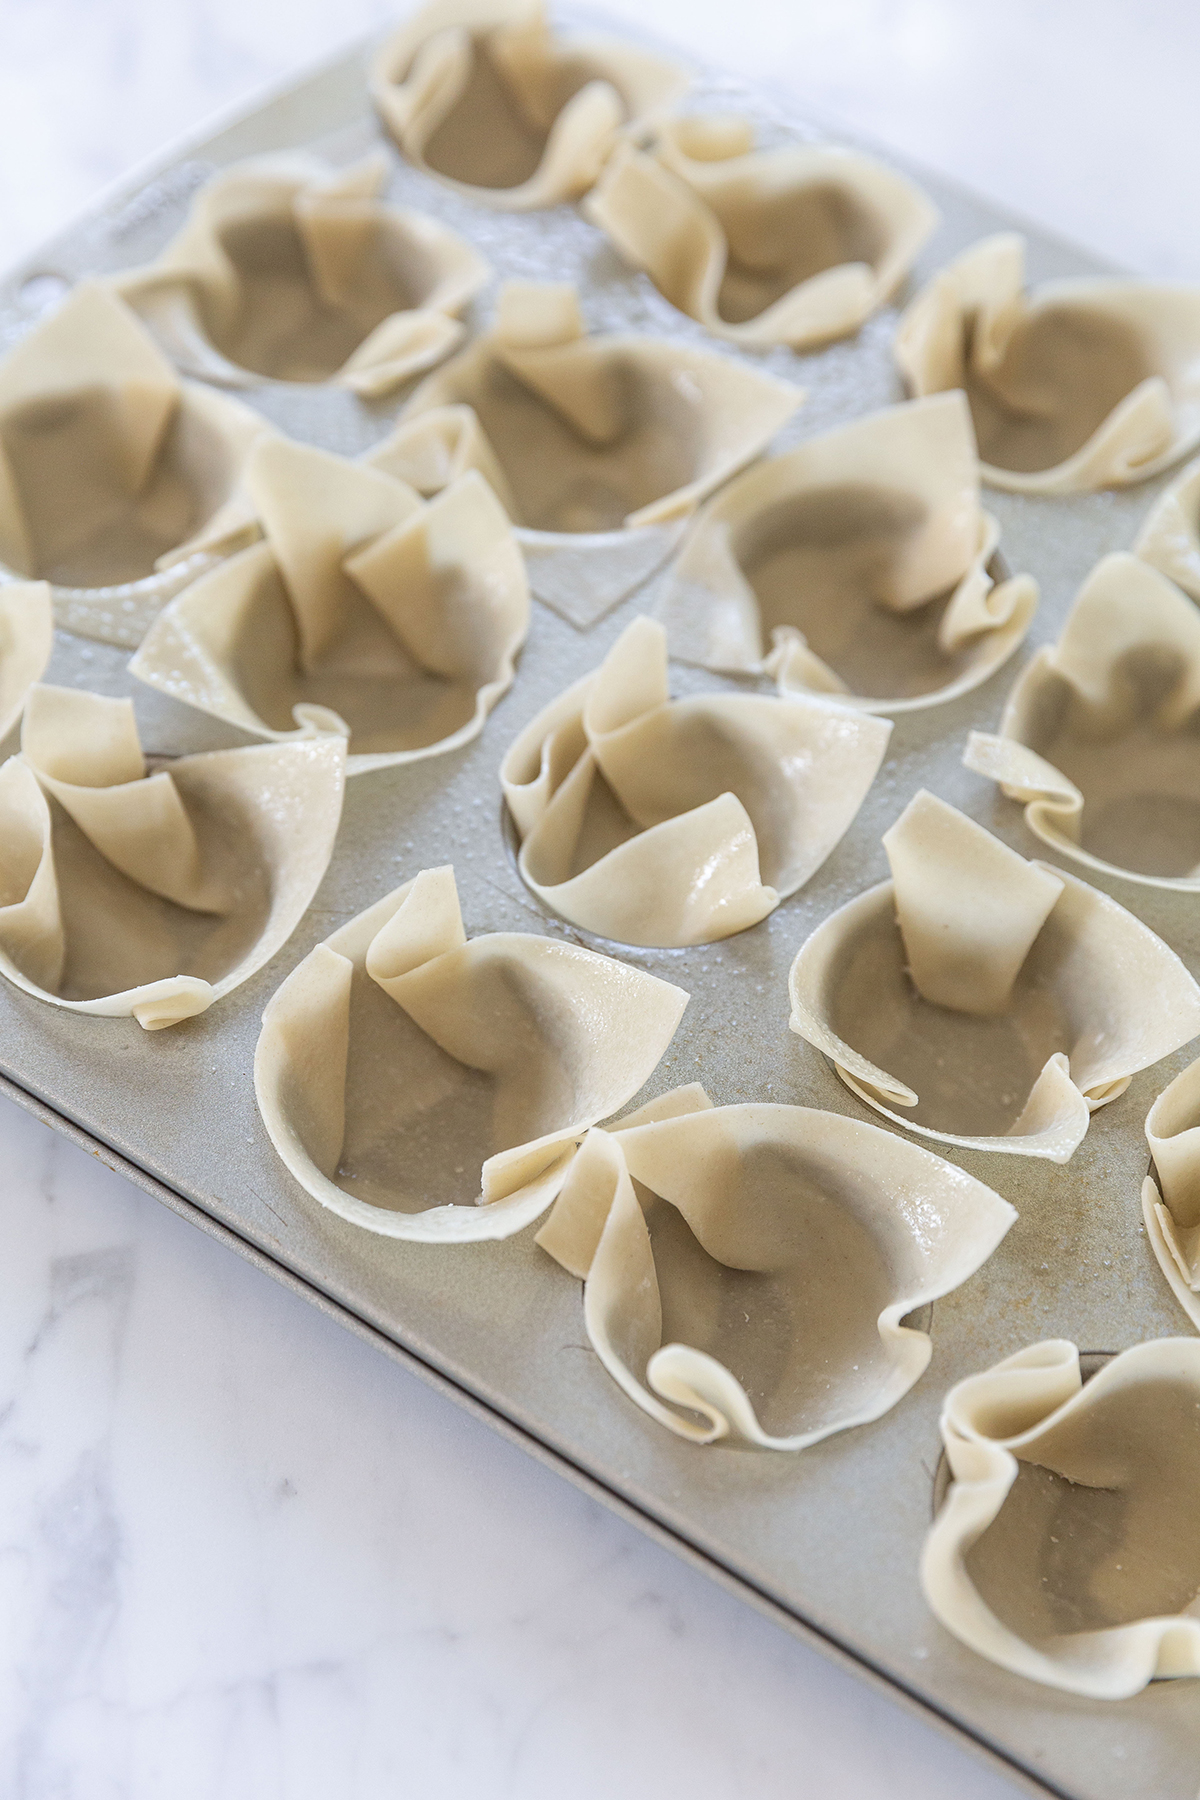 How to make Wonton Cups